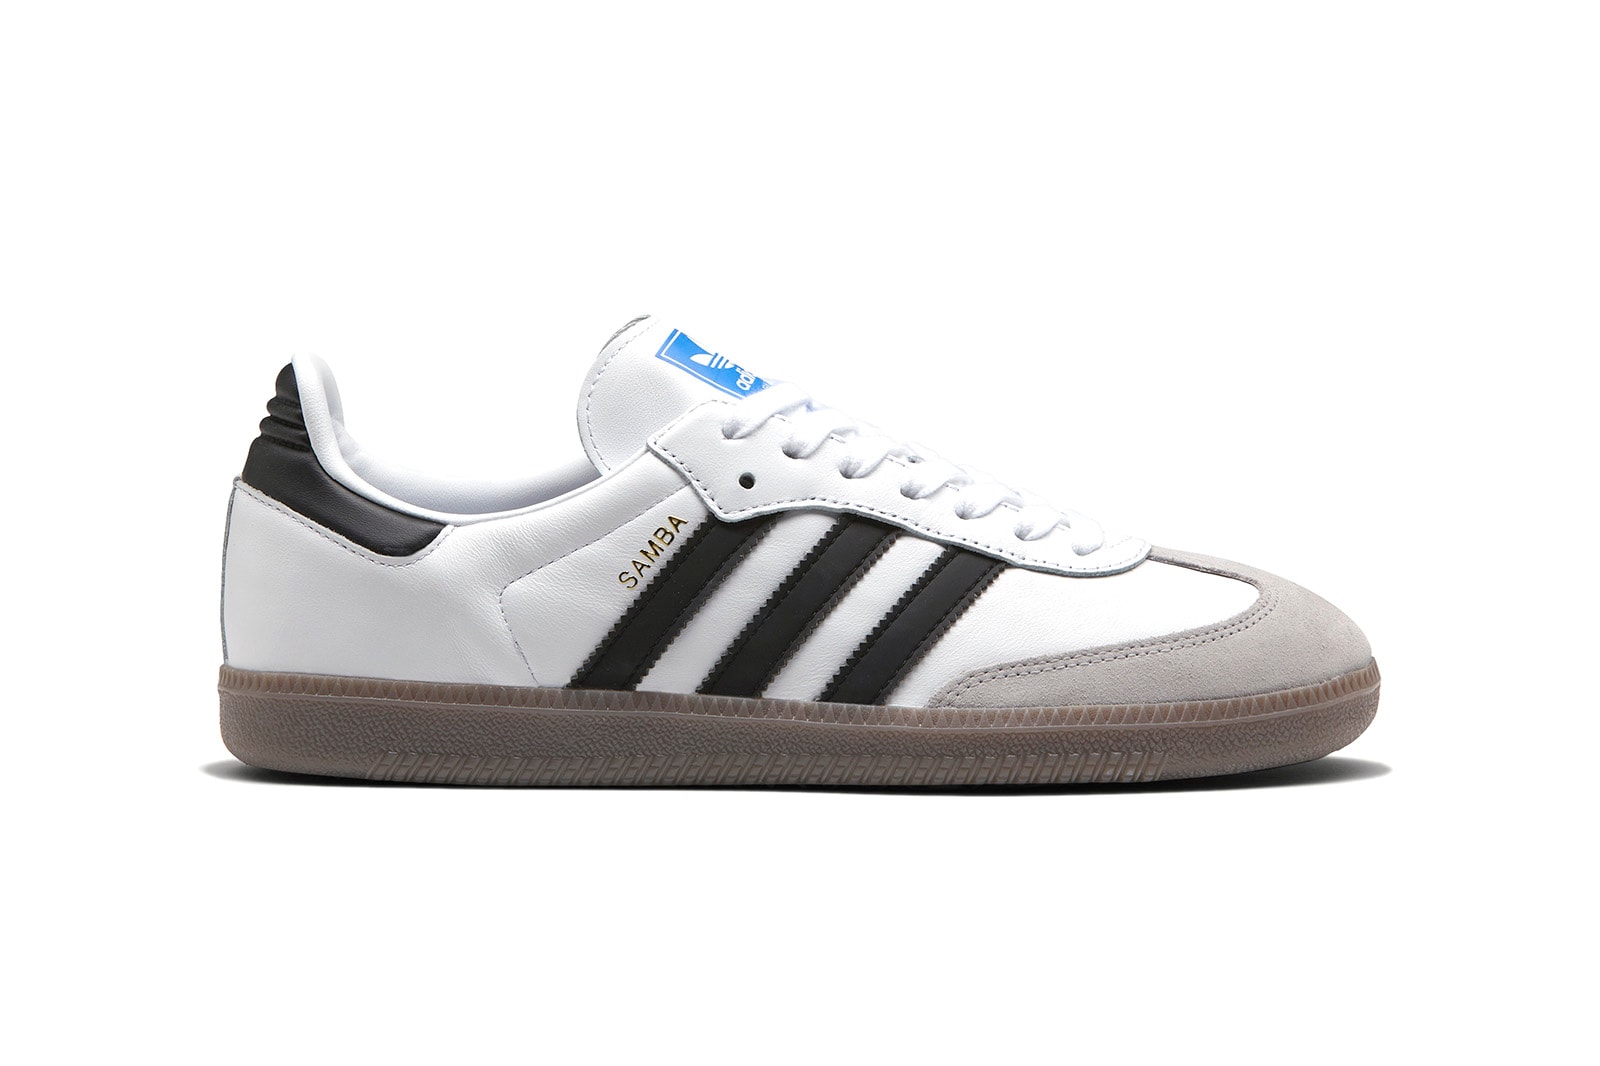 adidas Originals 'Samba' Classic Black White Details To Buy Purchase Availability For Sale Pricing